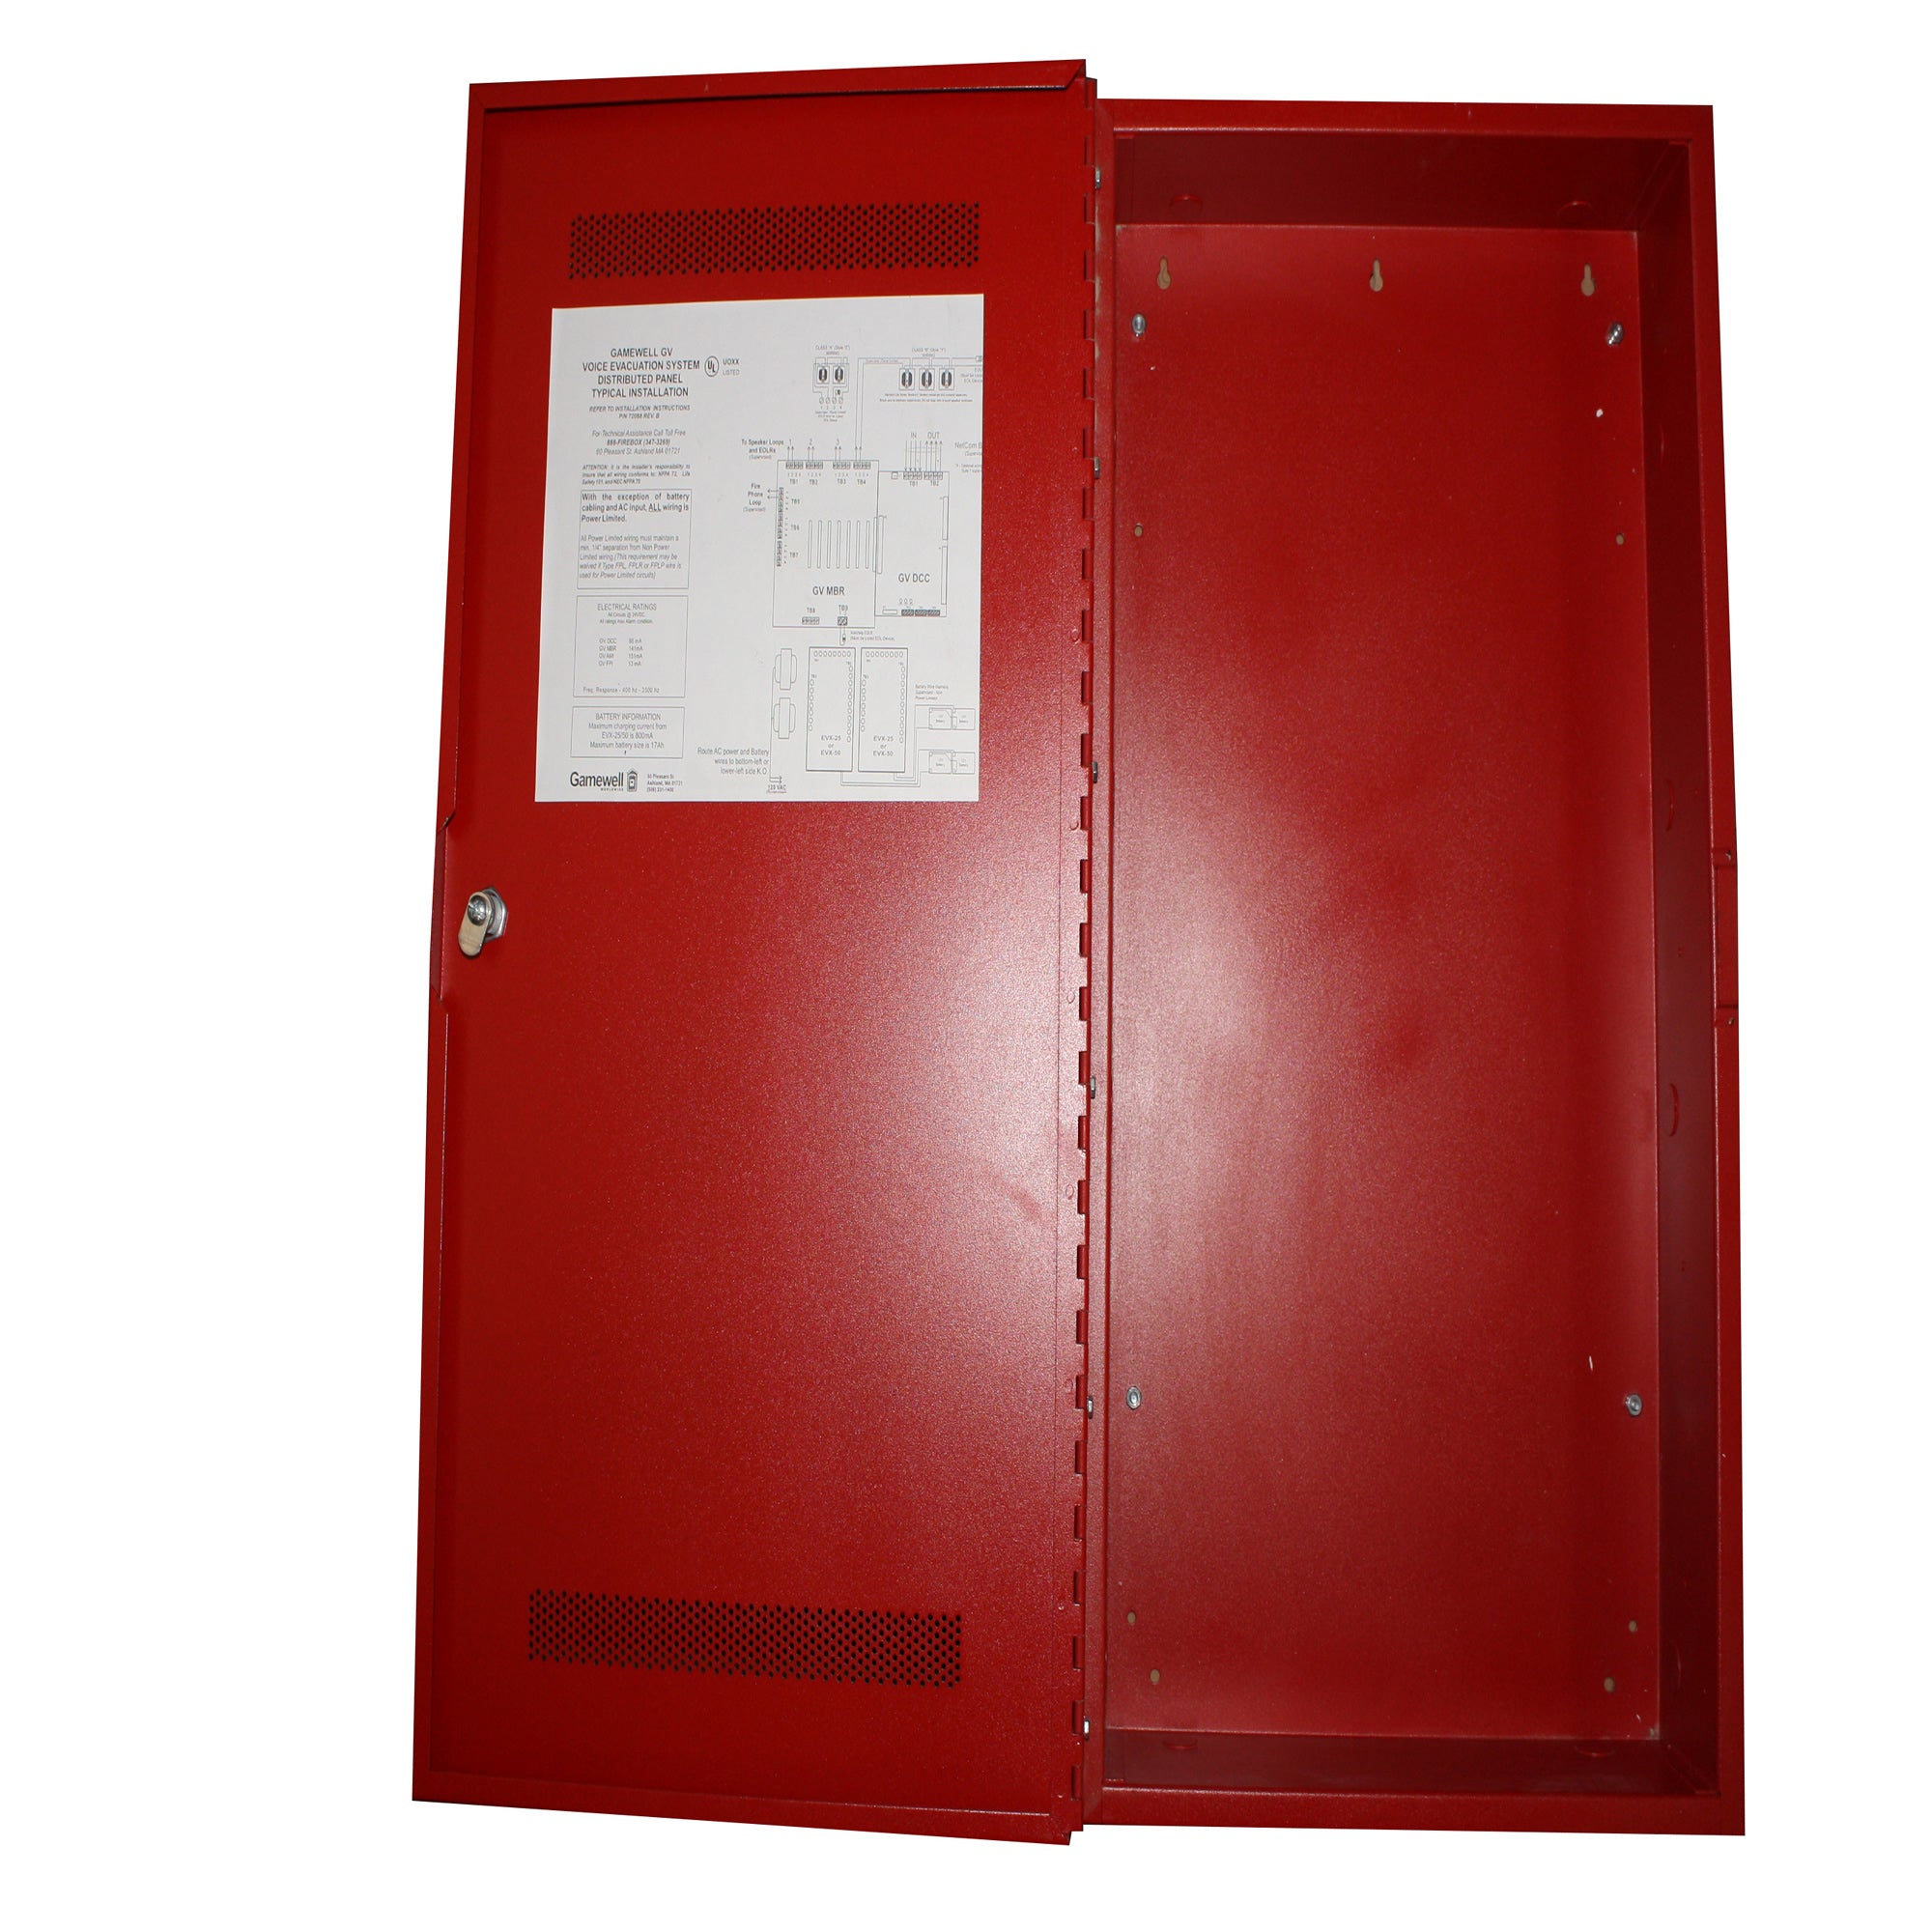 Gamewell-FCI, FCI GAMEWELL HONEYWELL GV-DP GV VOICE EVACUATION SYSTEM DISTRIBUTED PANEL CABINE